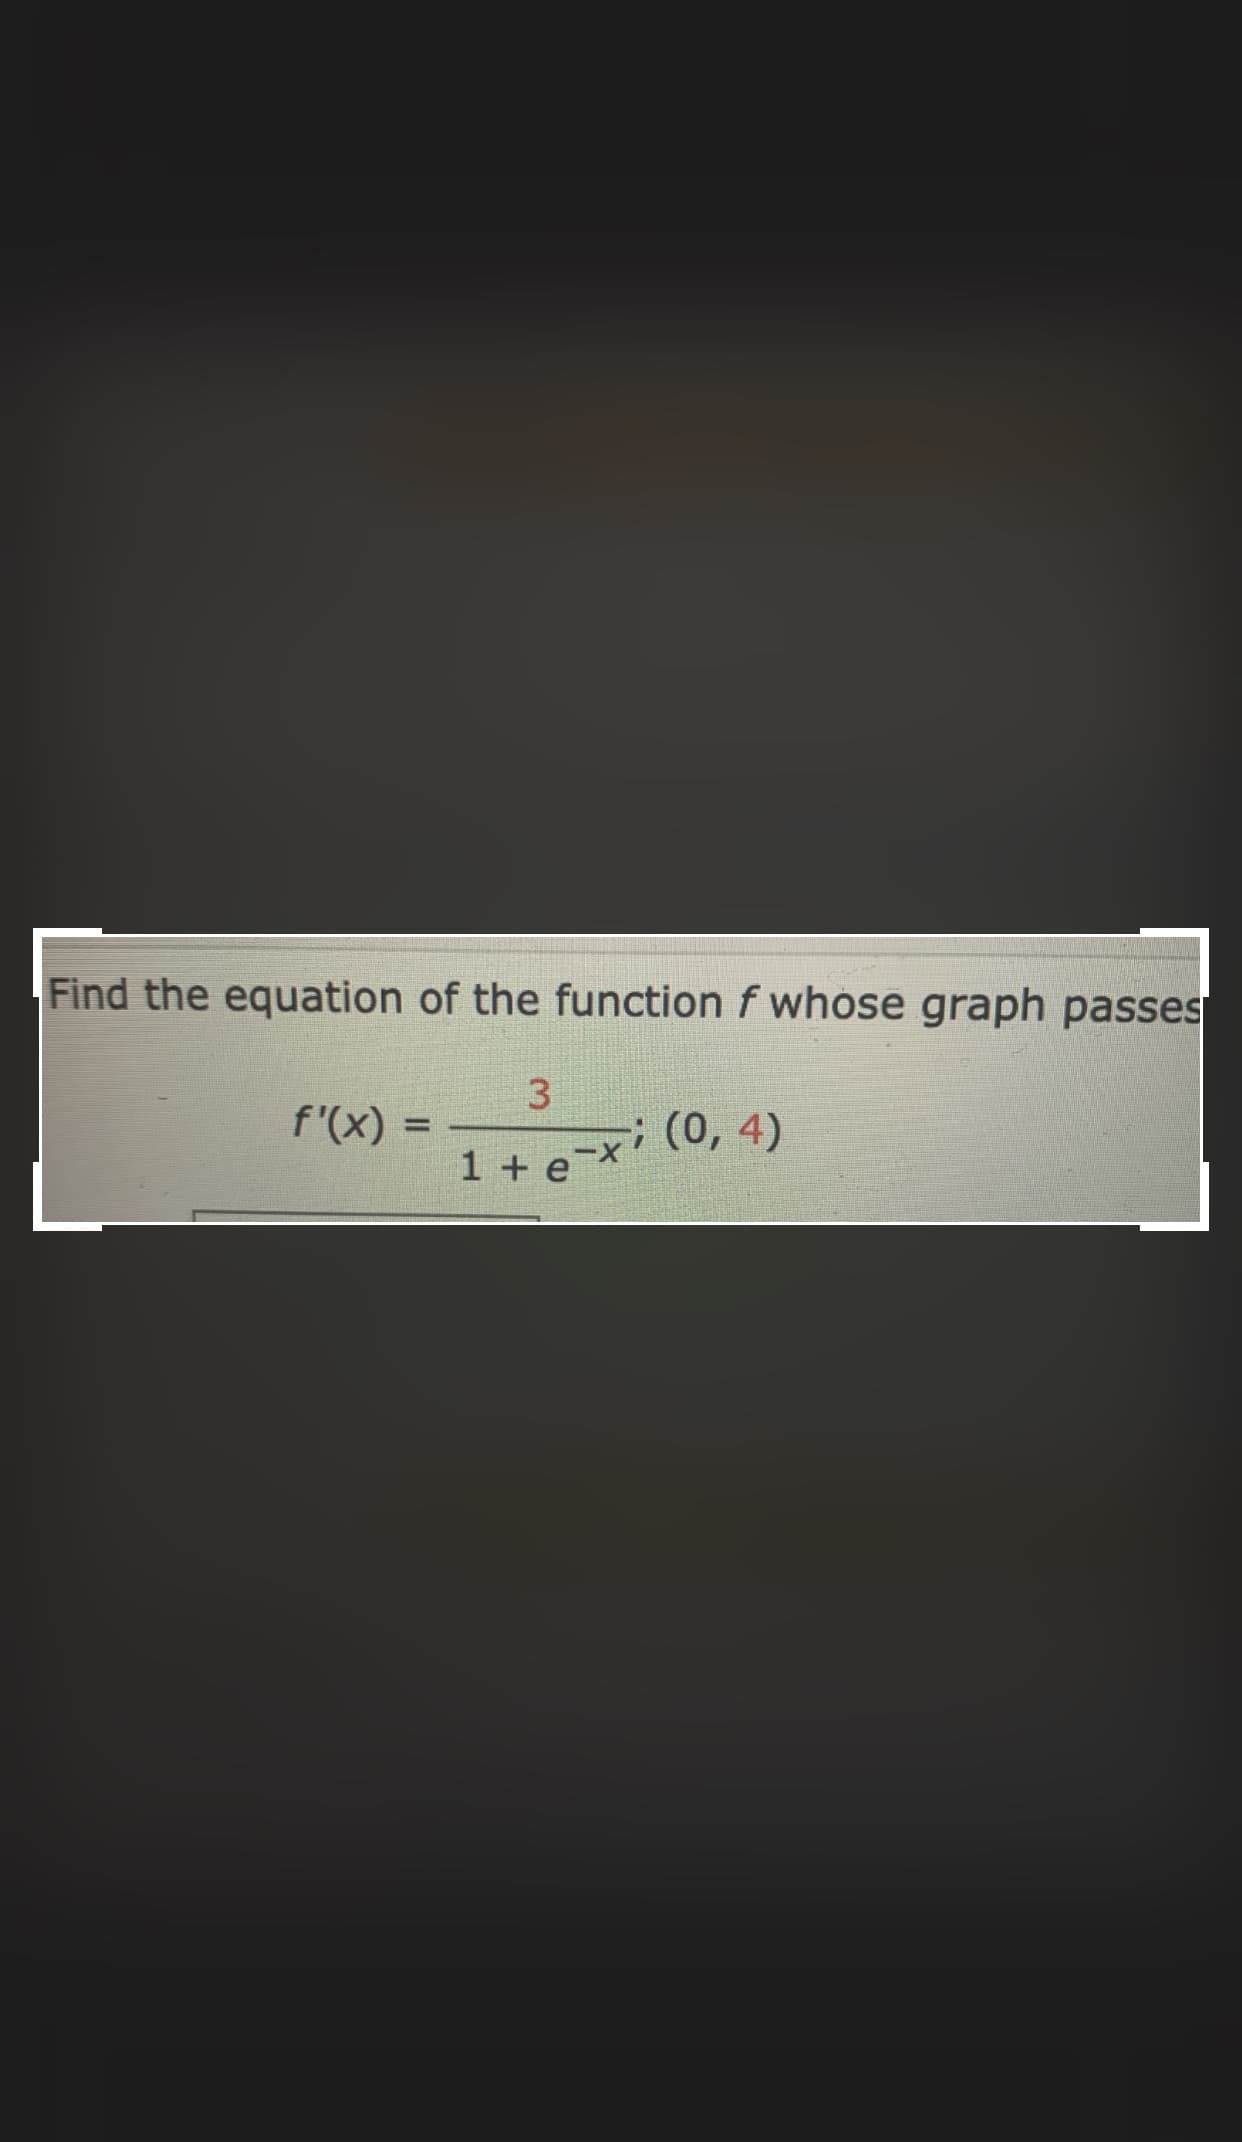 Find the equation of the function f whoseg
3
f'(x) =
(0, 4)
%3D
--
1 + e
